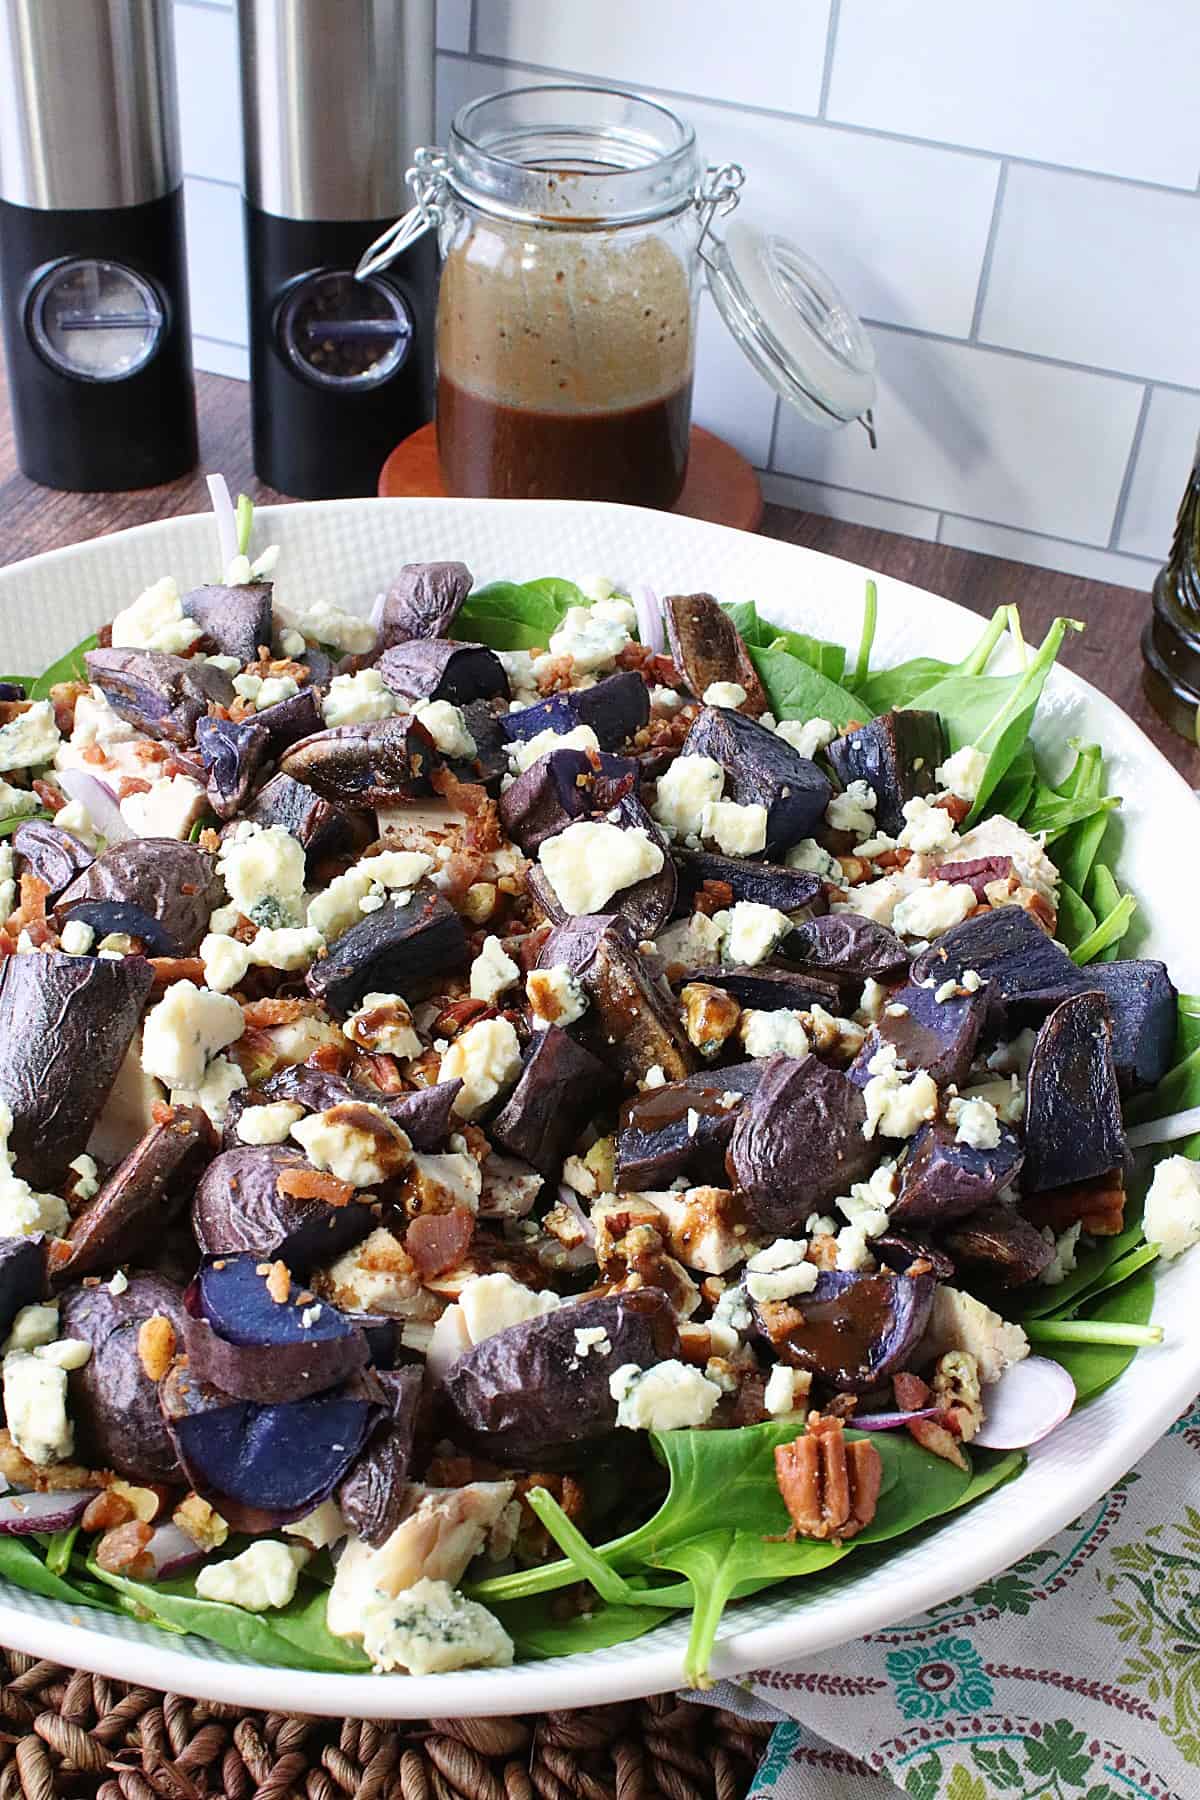 Green spinach, purple potatoes, brown pecans, and white blue cheese in a salad bowl.